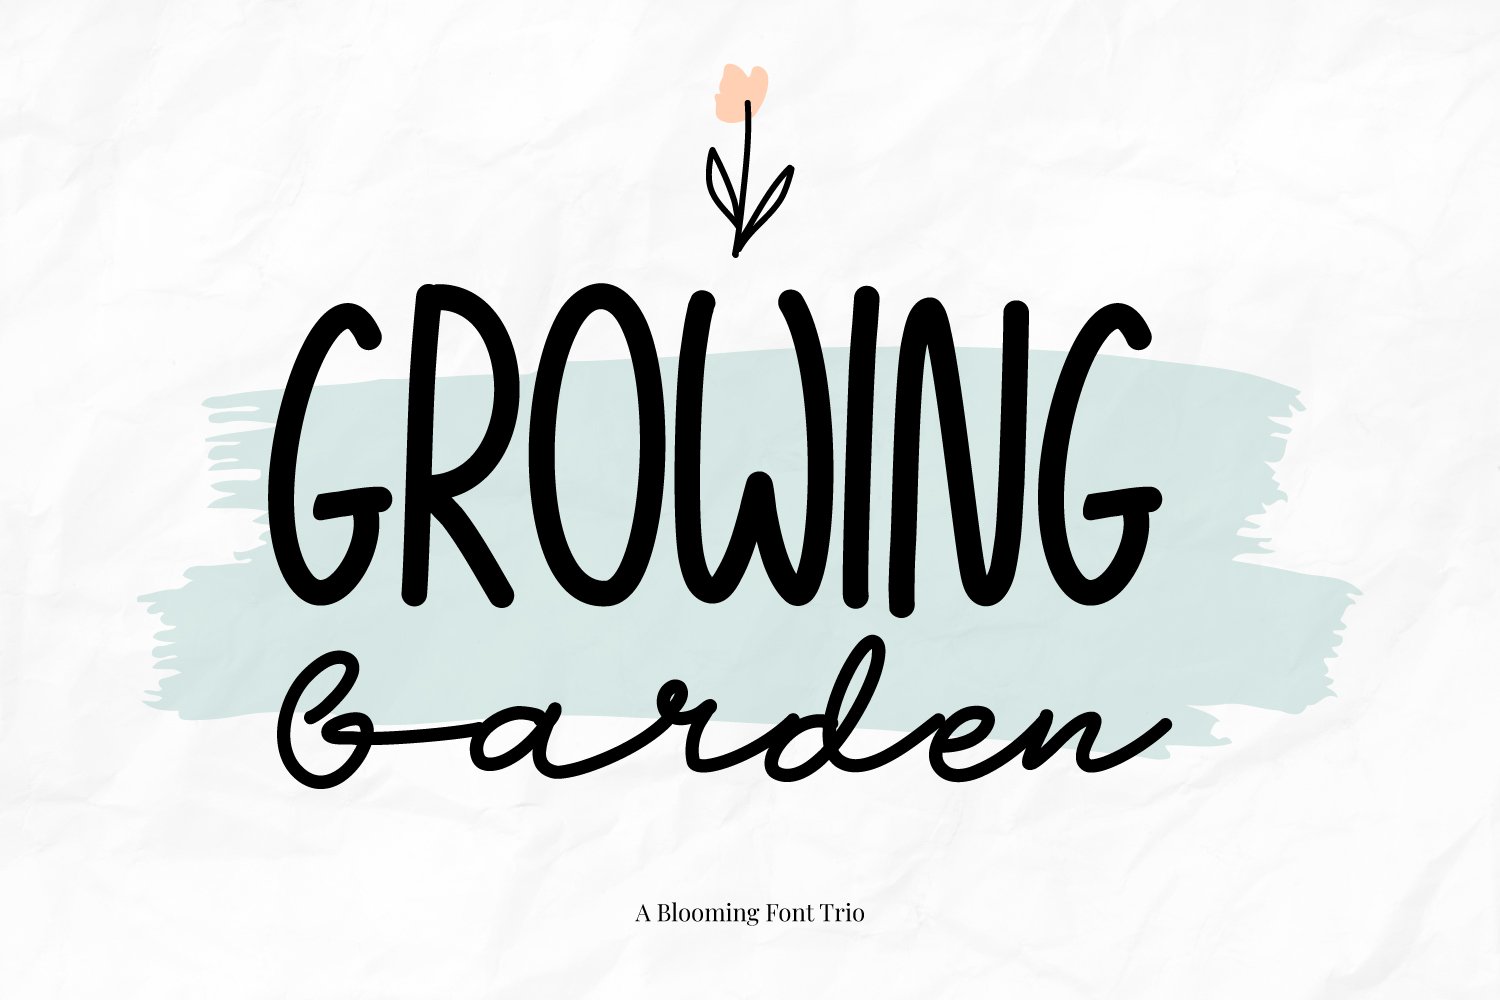 Growing Garden Blooming Font Trio cover image.